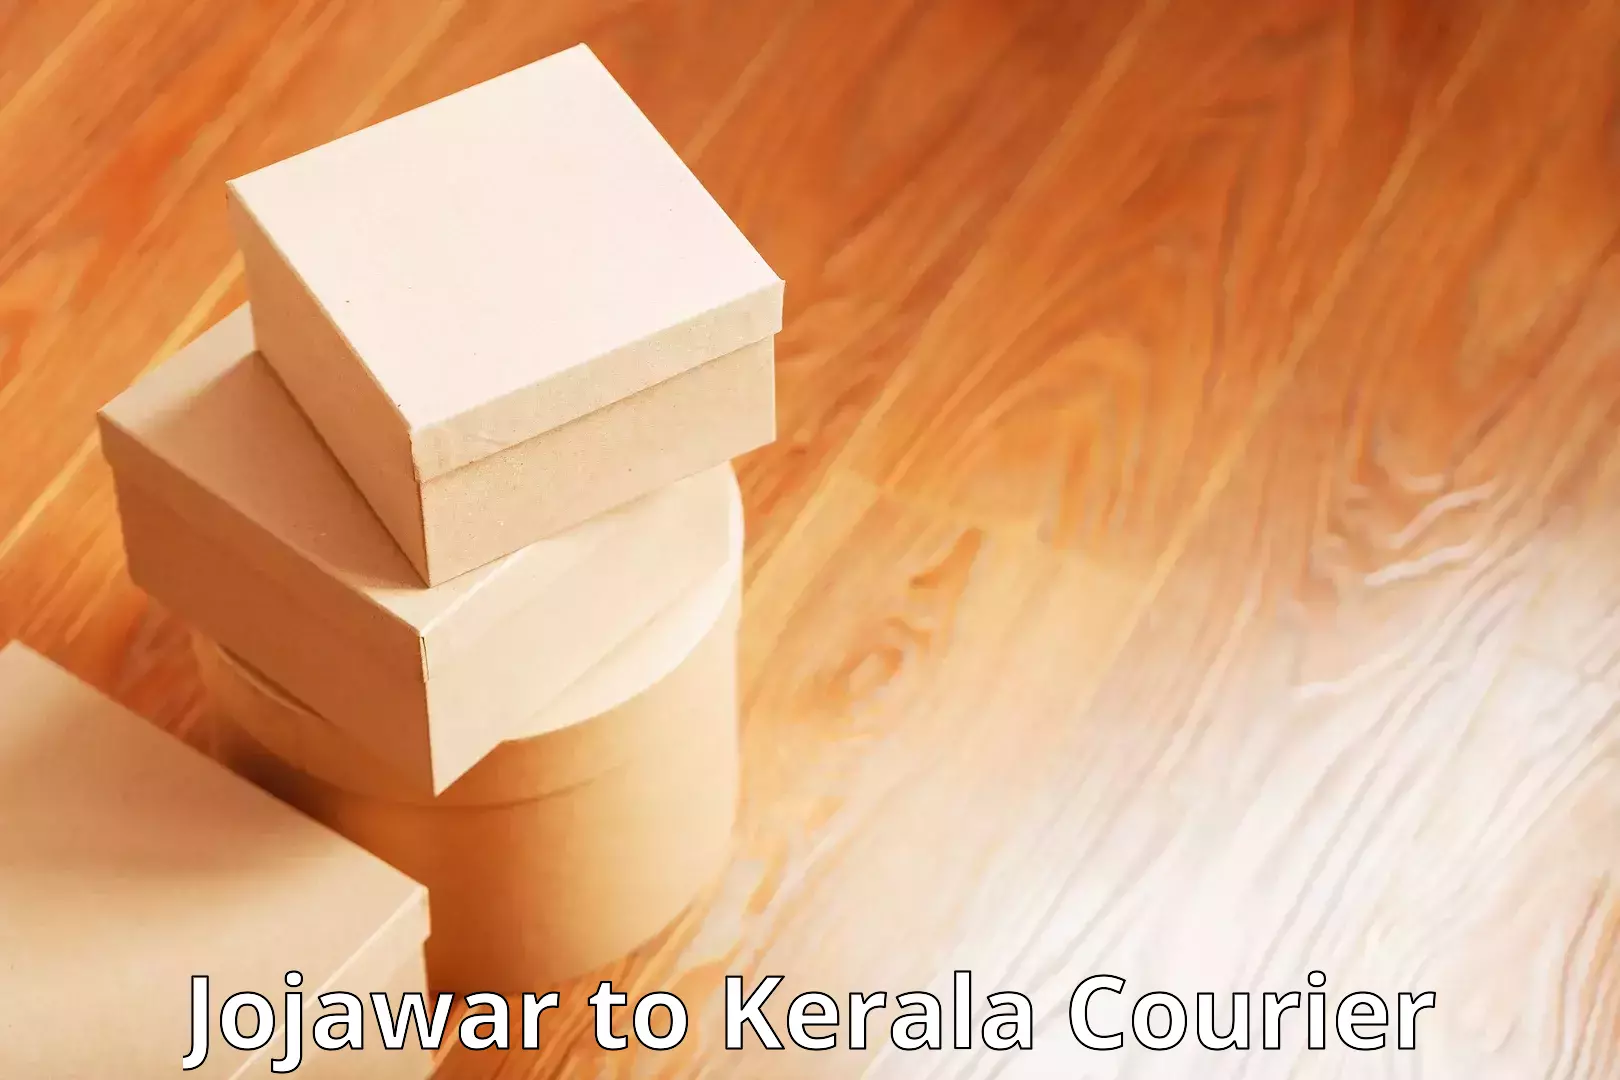 Fast delivery service Jojawar to Kerala